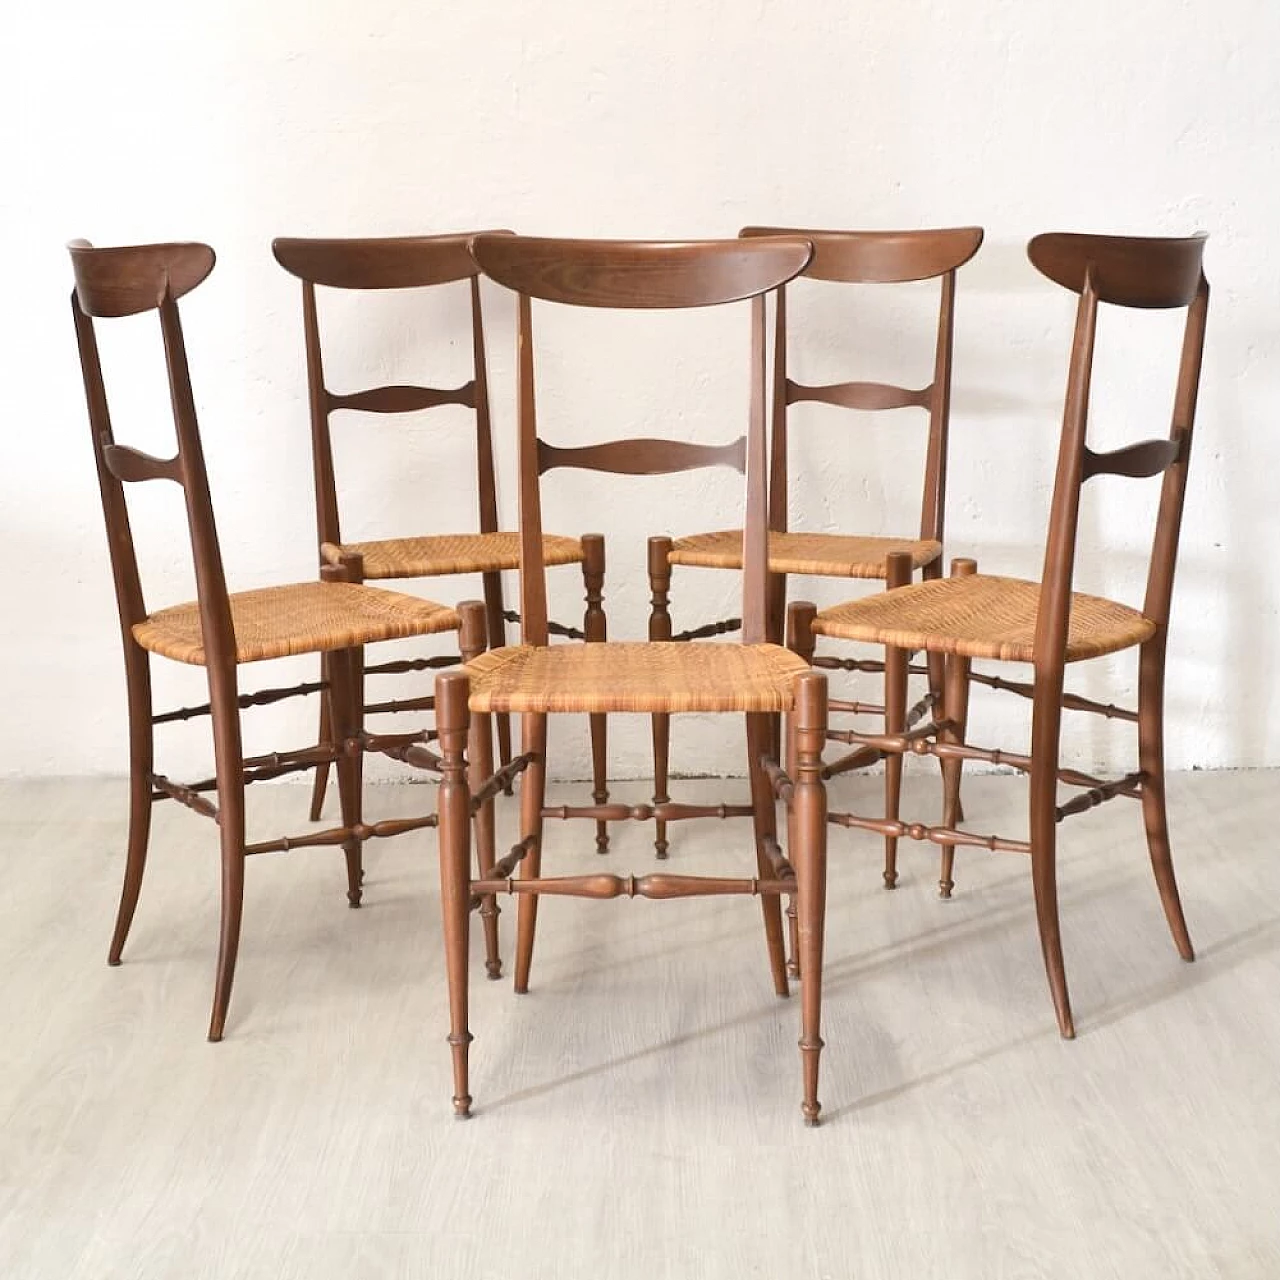 5 Chiavari chairs in wood and woven straw, 1950s 1